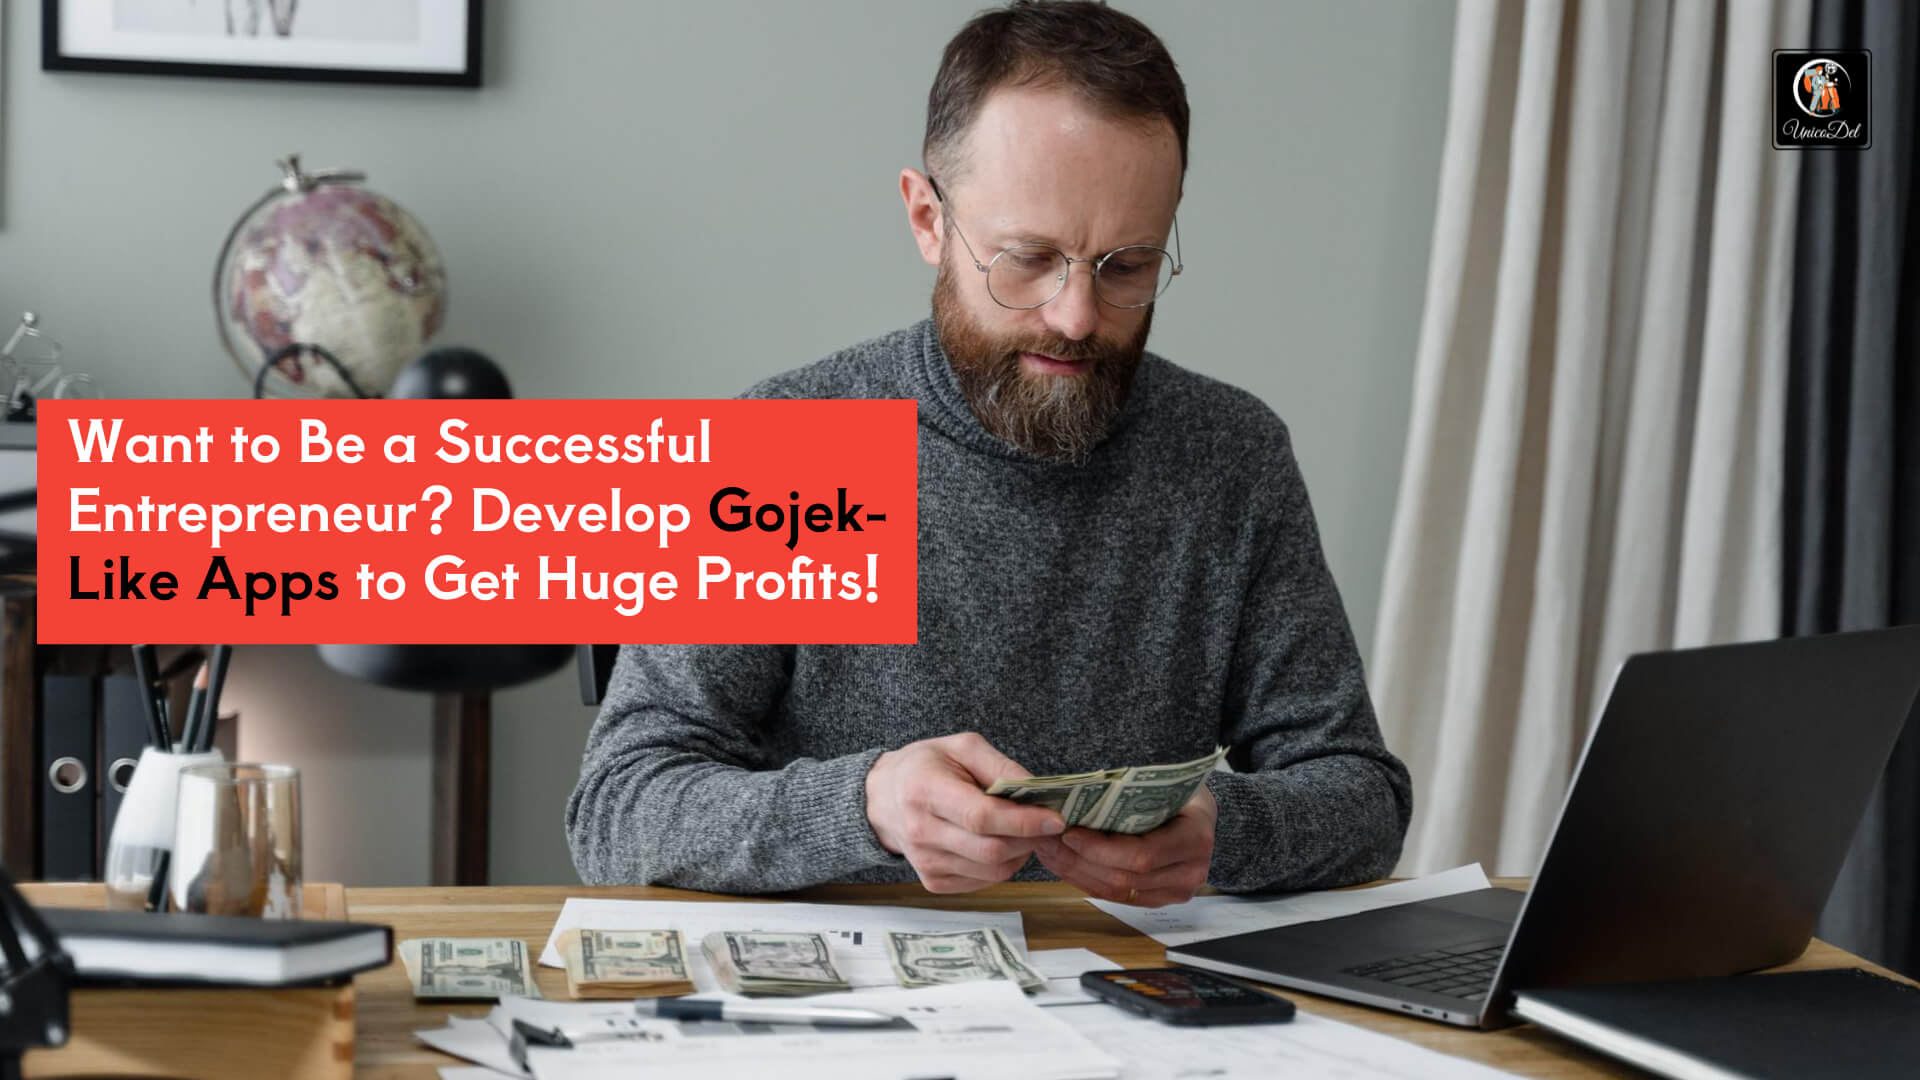 Want to Be a Successful Entrepreneur? Develop Gojek-Like Apps to Get Huge Profits